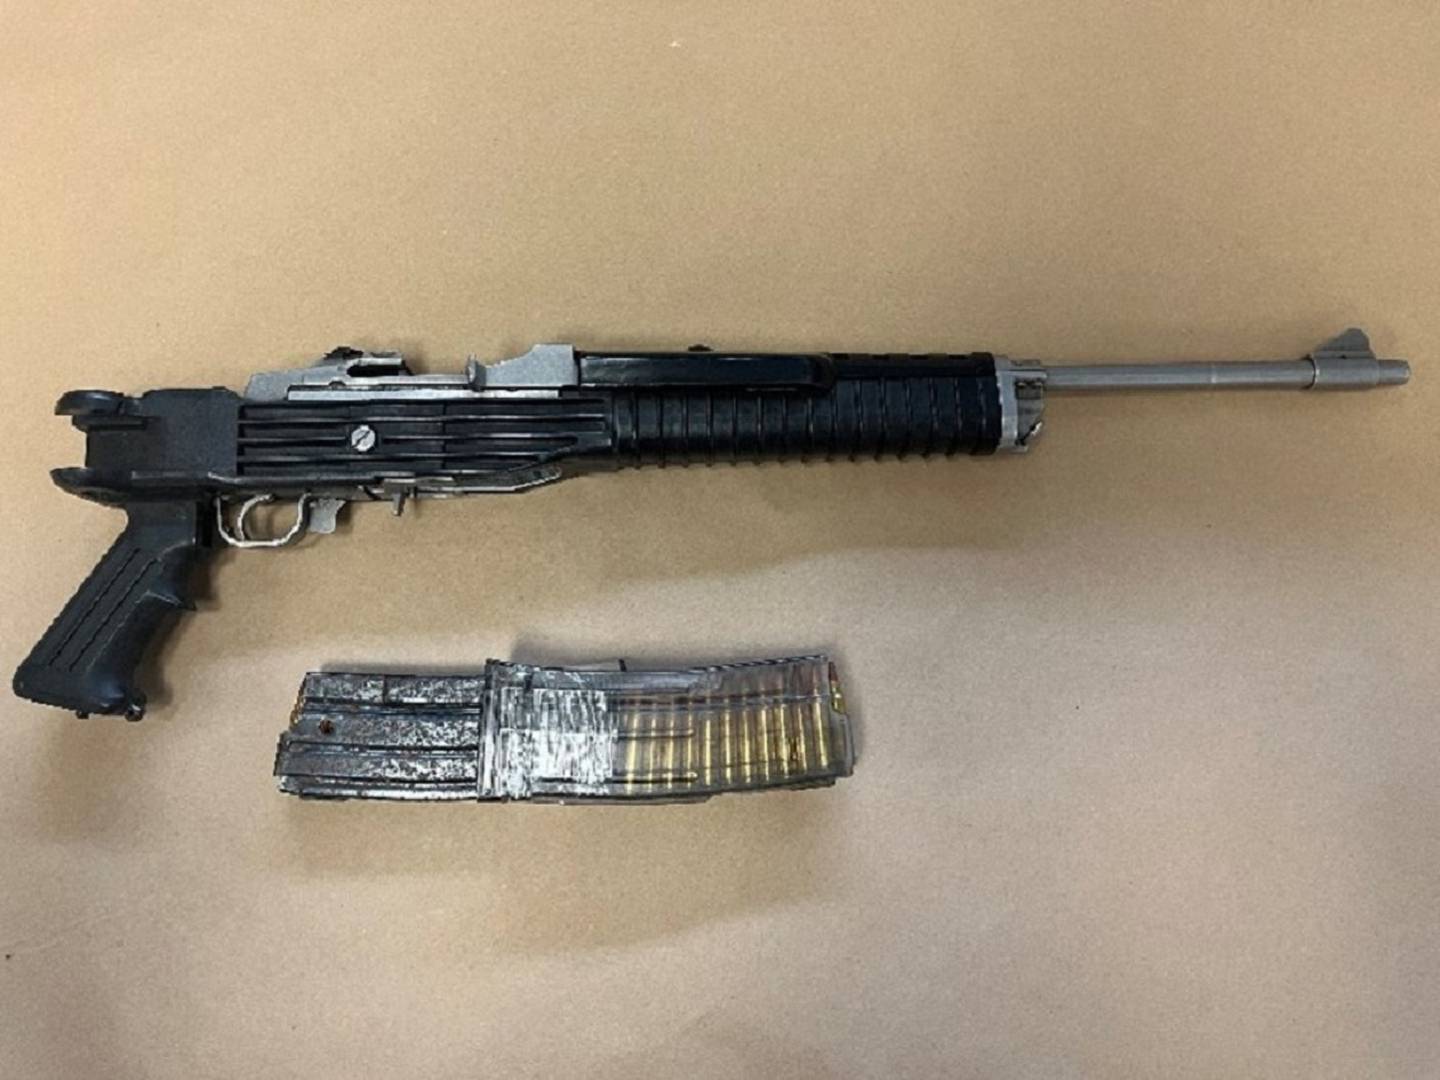 Police found an AK-47-style semi-automatic rifle and two magazines taped together in Brandon Tangi's car. 